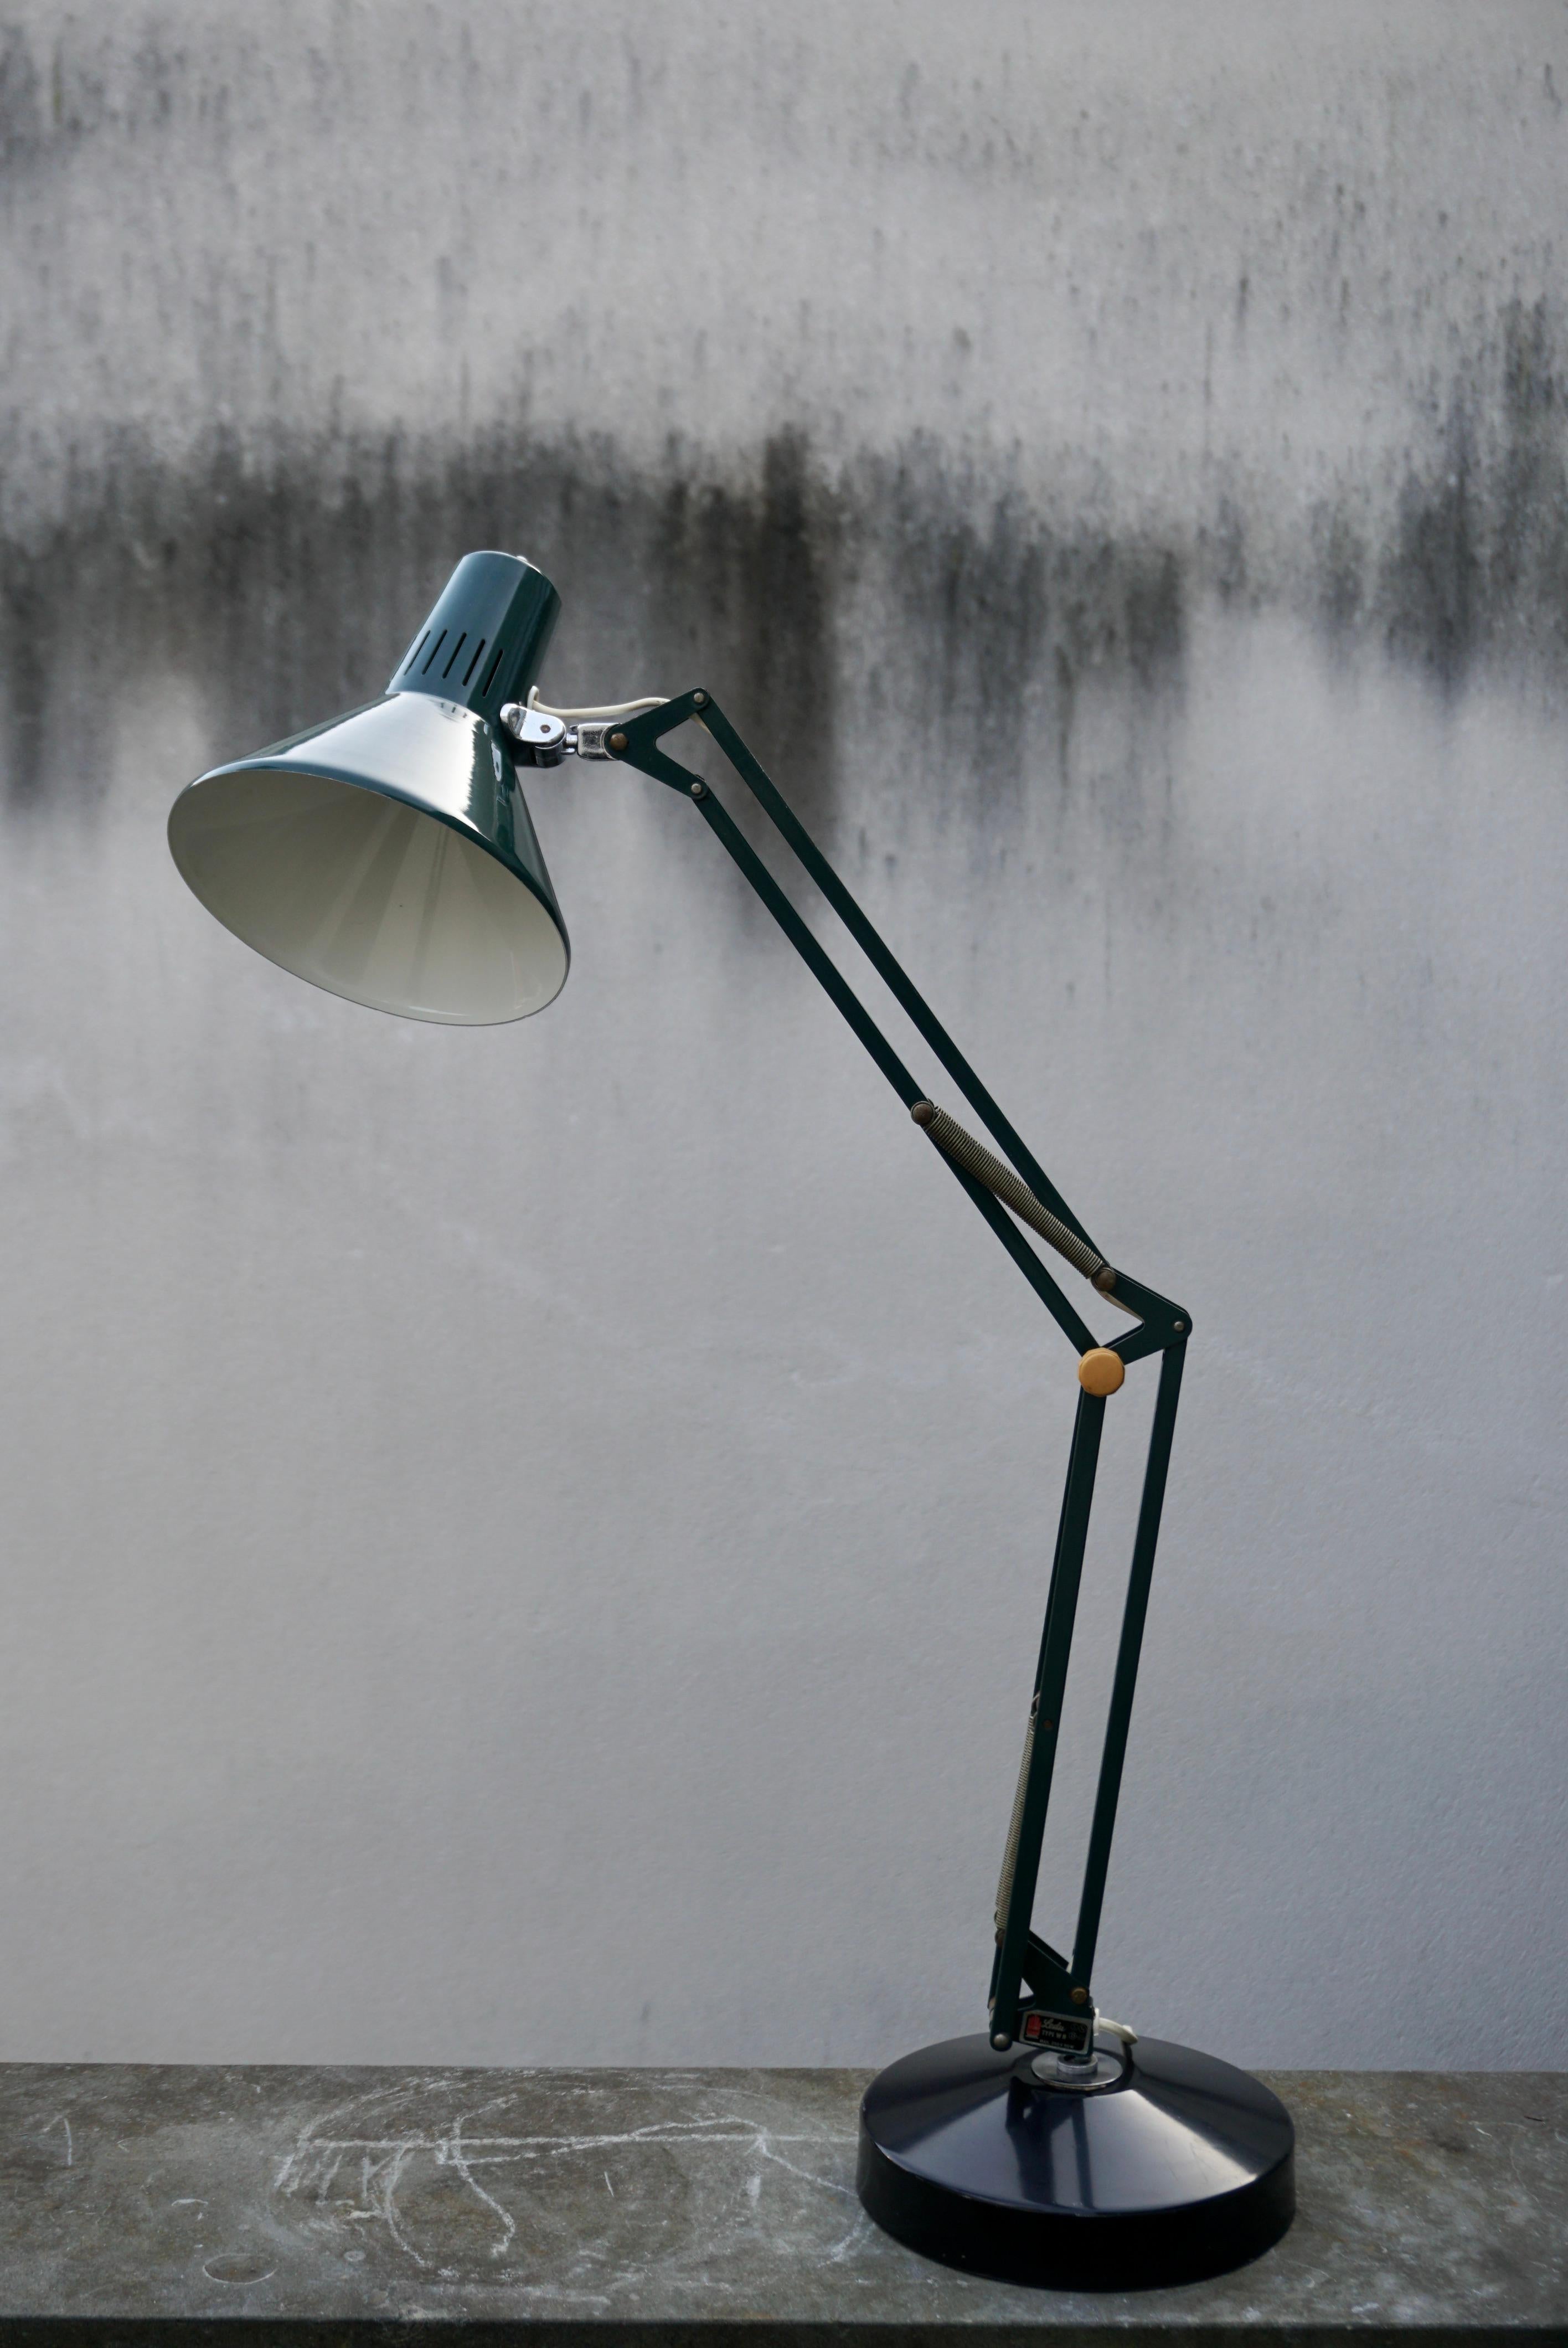 20th Century Industrial Office Architect Desk Lamp by Ledu, 1970s, Made in Sweden For Sale